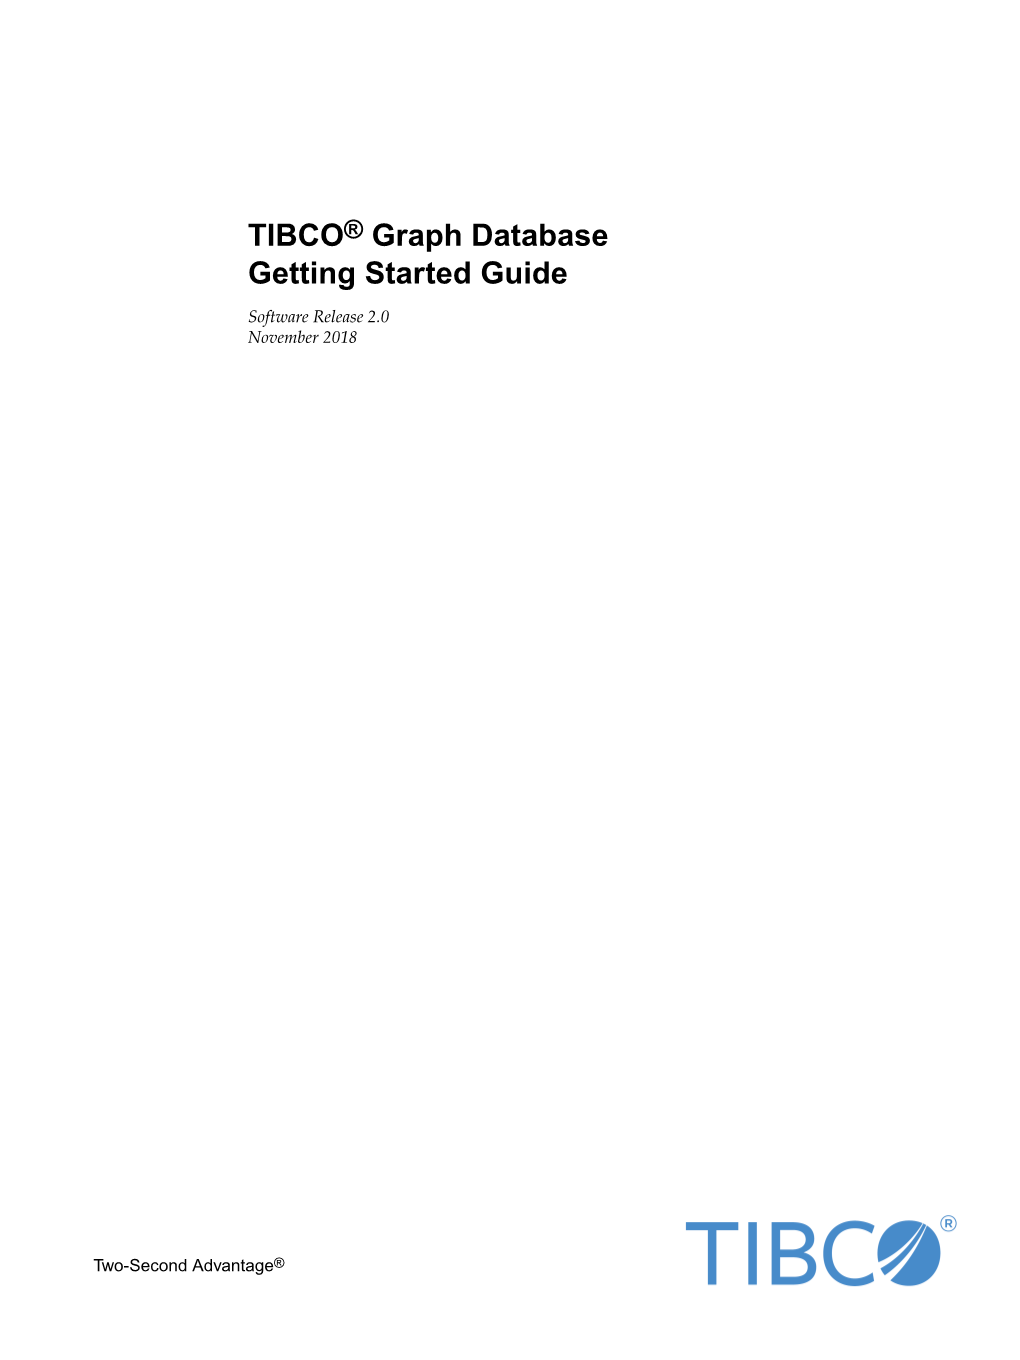 TIBCO® Graph Database Getting Started Guide